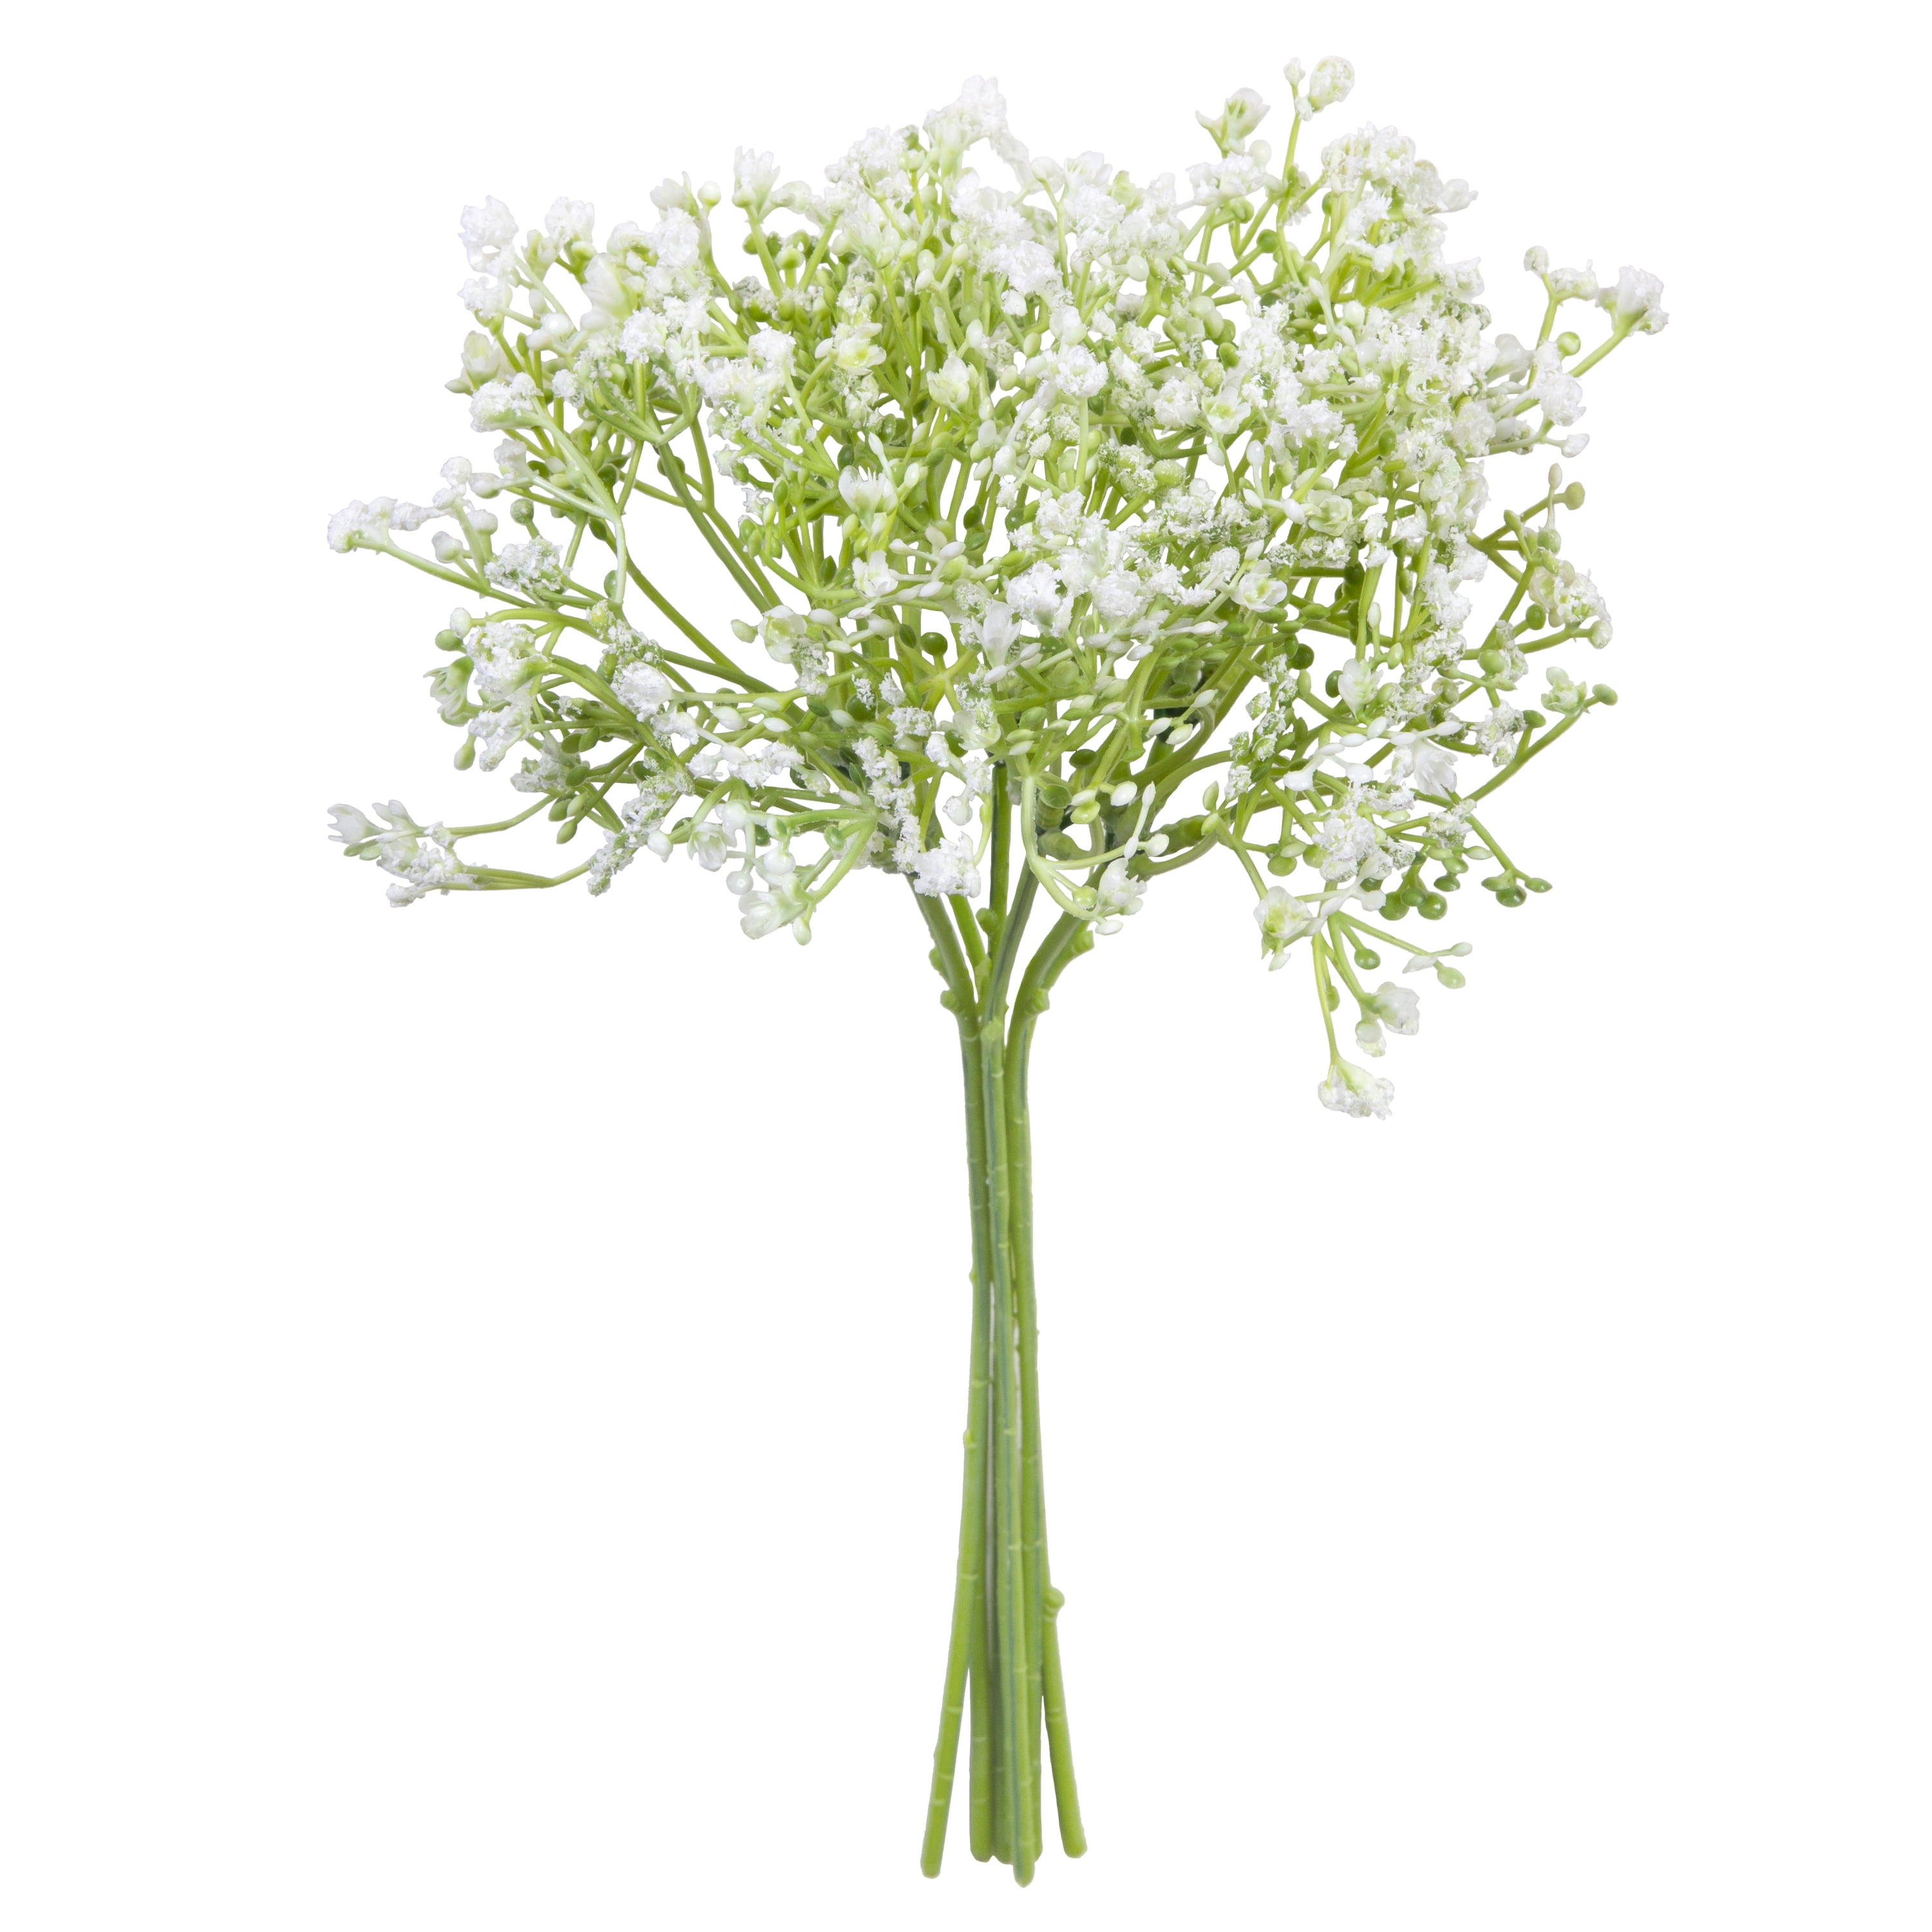 Mainstays Baby's Breath Pick, Solid, White Green, 13"